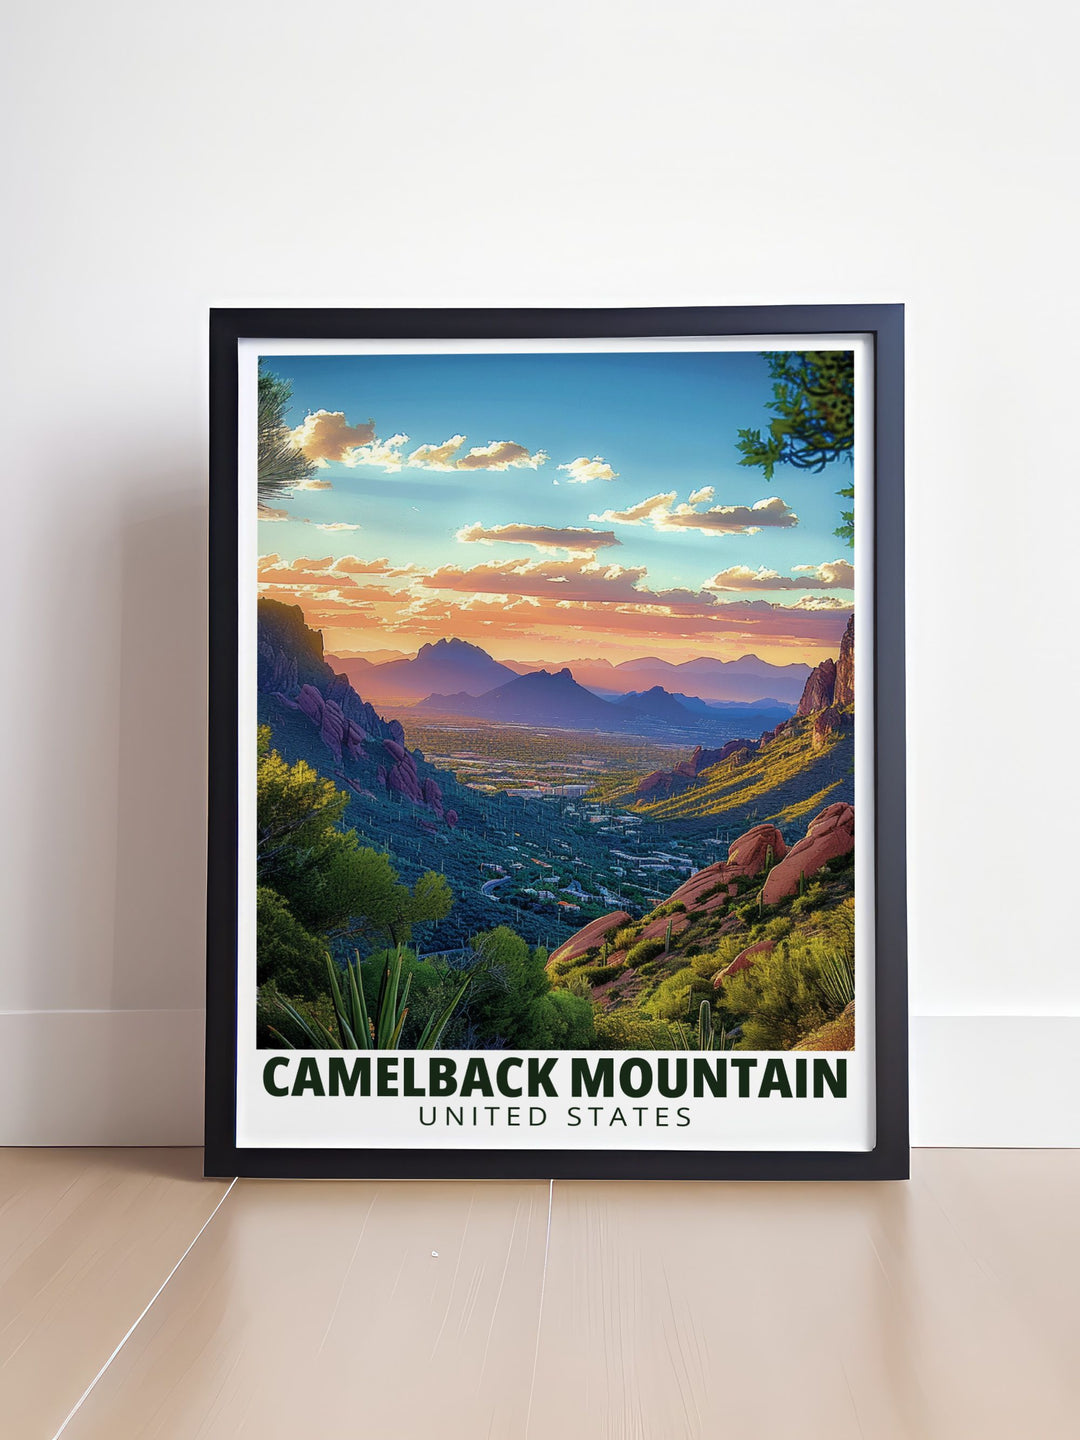 This Summit View home decor piece features a beautifully detailed Arizona travel print perfect for nature lovers. The artwork highlights the scenic views of Mt. Camelback making it an excellent addition to any room or a thoughtful travel gift.